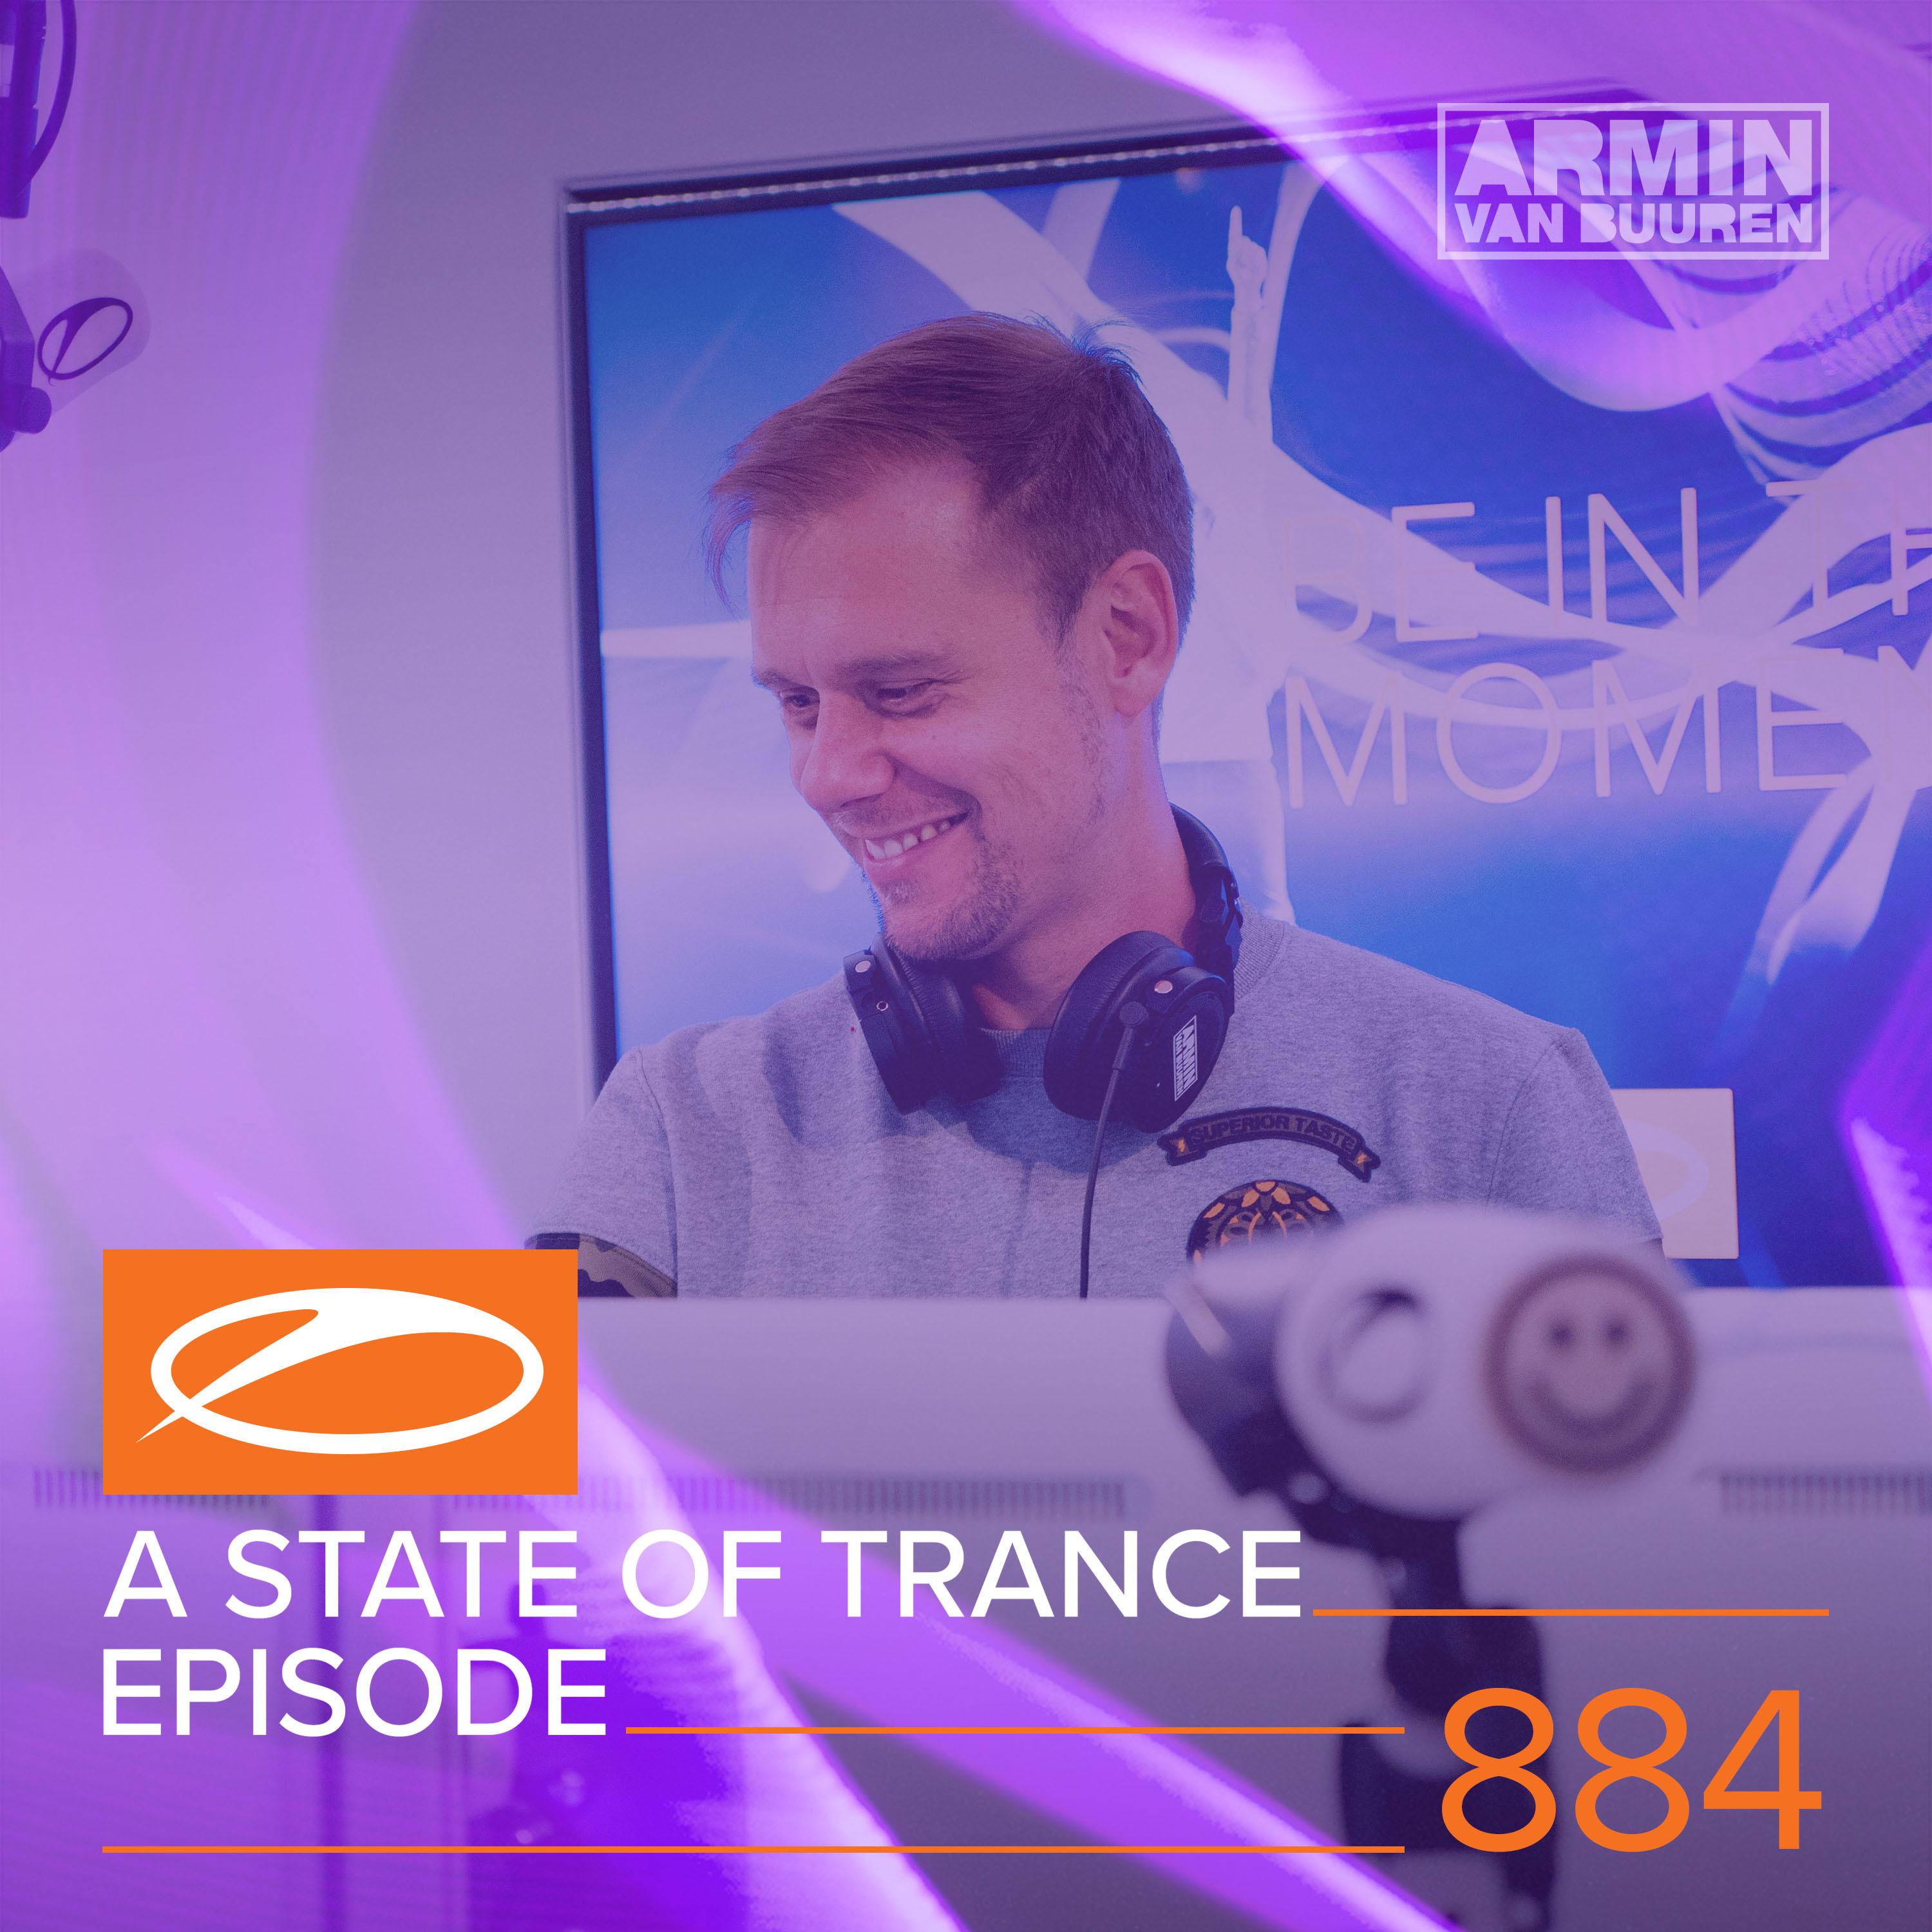 A State Of Trance (ASOT 884) (Shout Outs, Pt. 2)